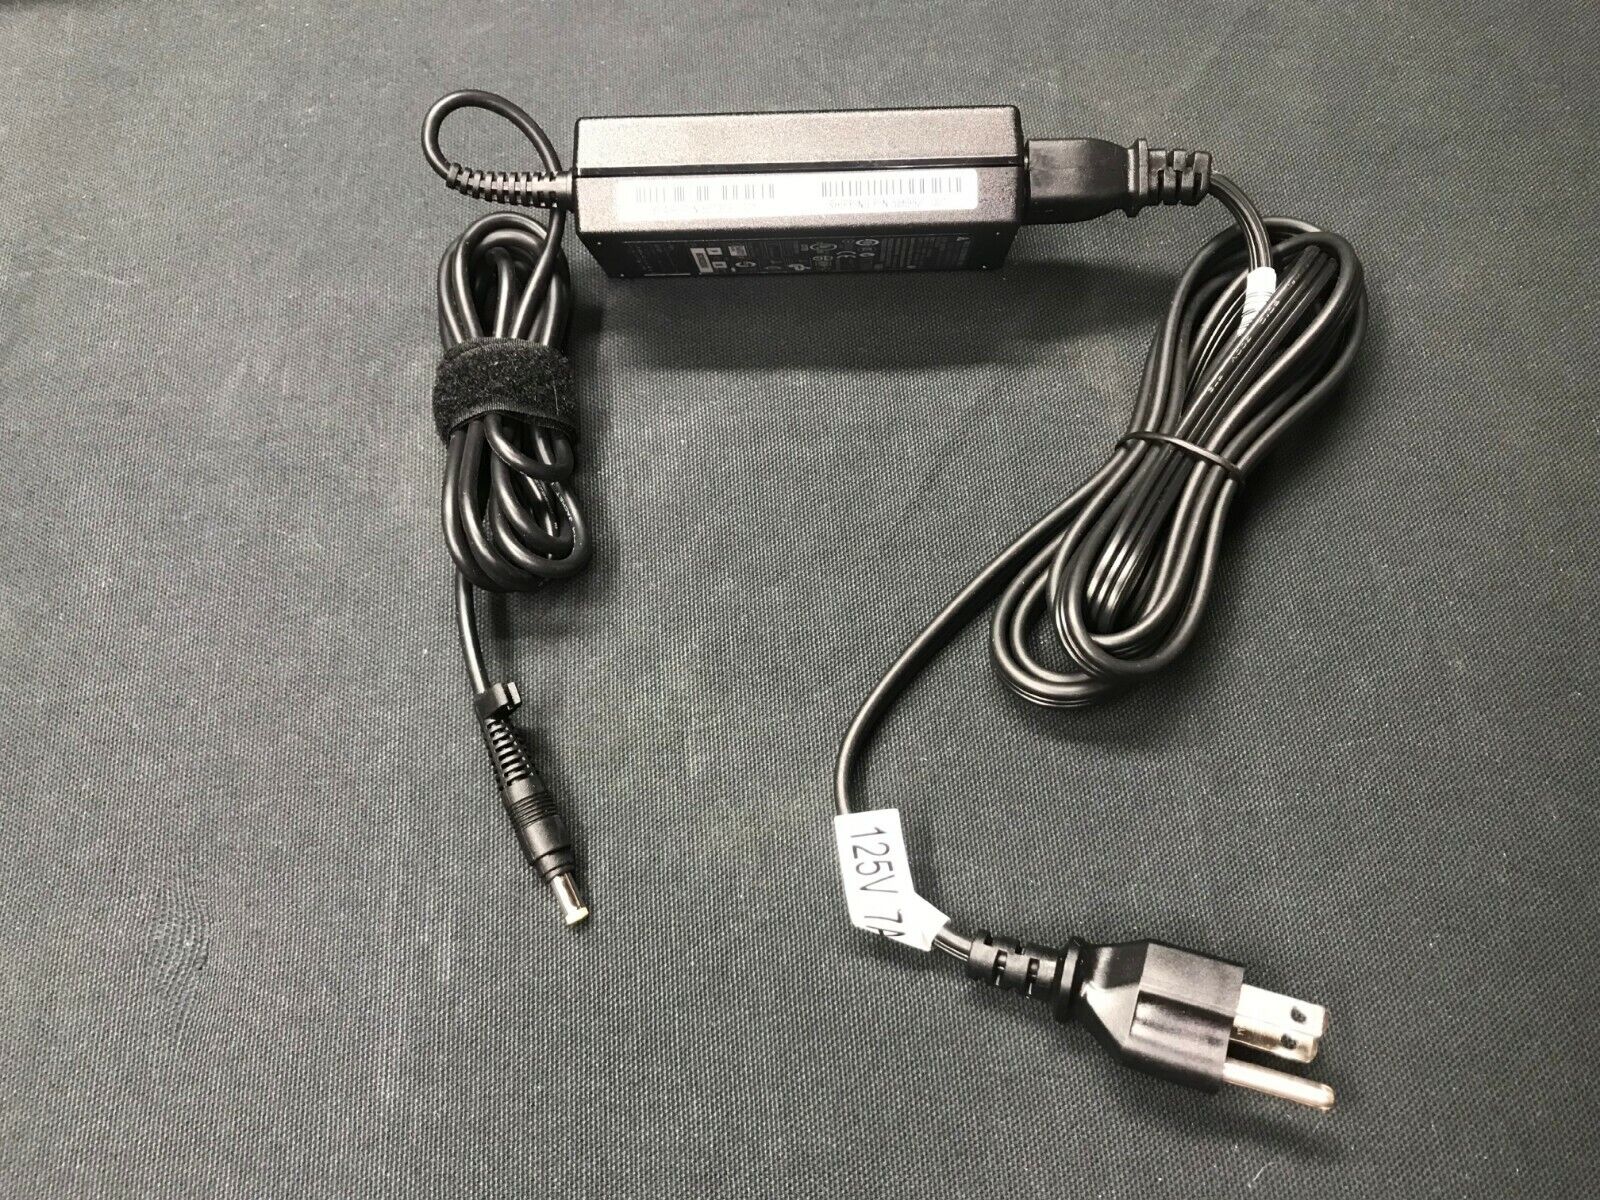 OEM HP ADP-65JH Thin Client Delta Electronics 19V 3.42A Power Adapter 587303-001